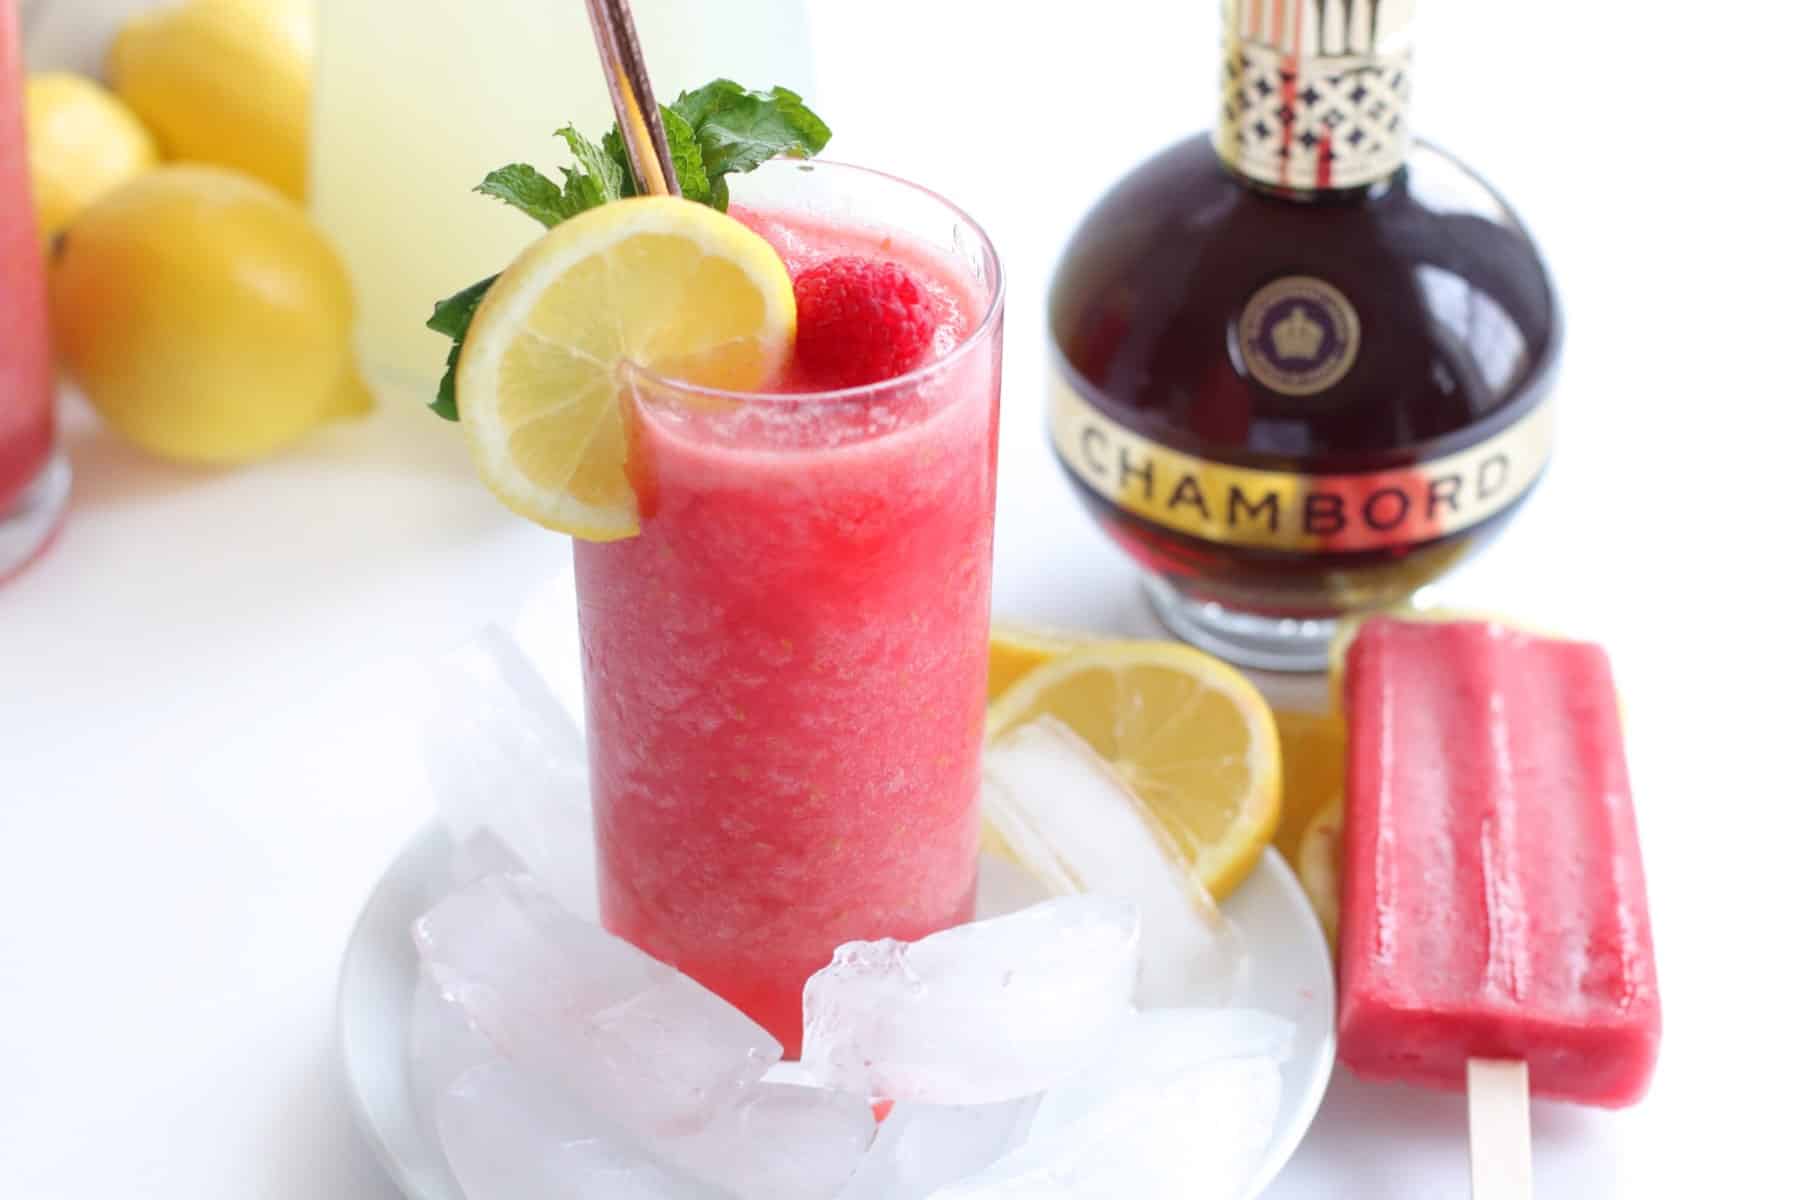 Showing a frozen lemonade in a tall glass with a bottle of Chambord and a raspberry popsicle